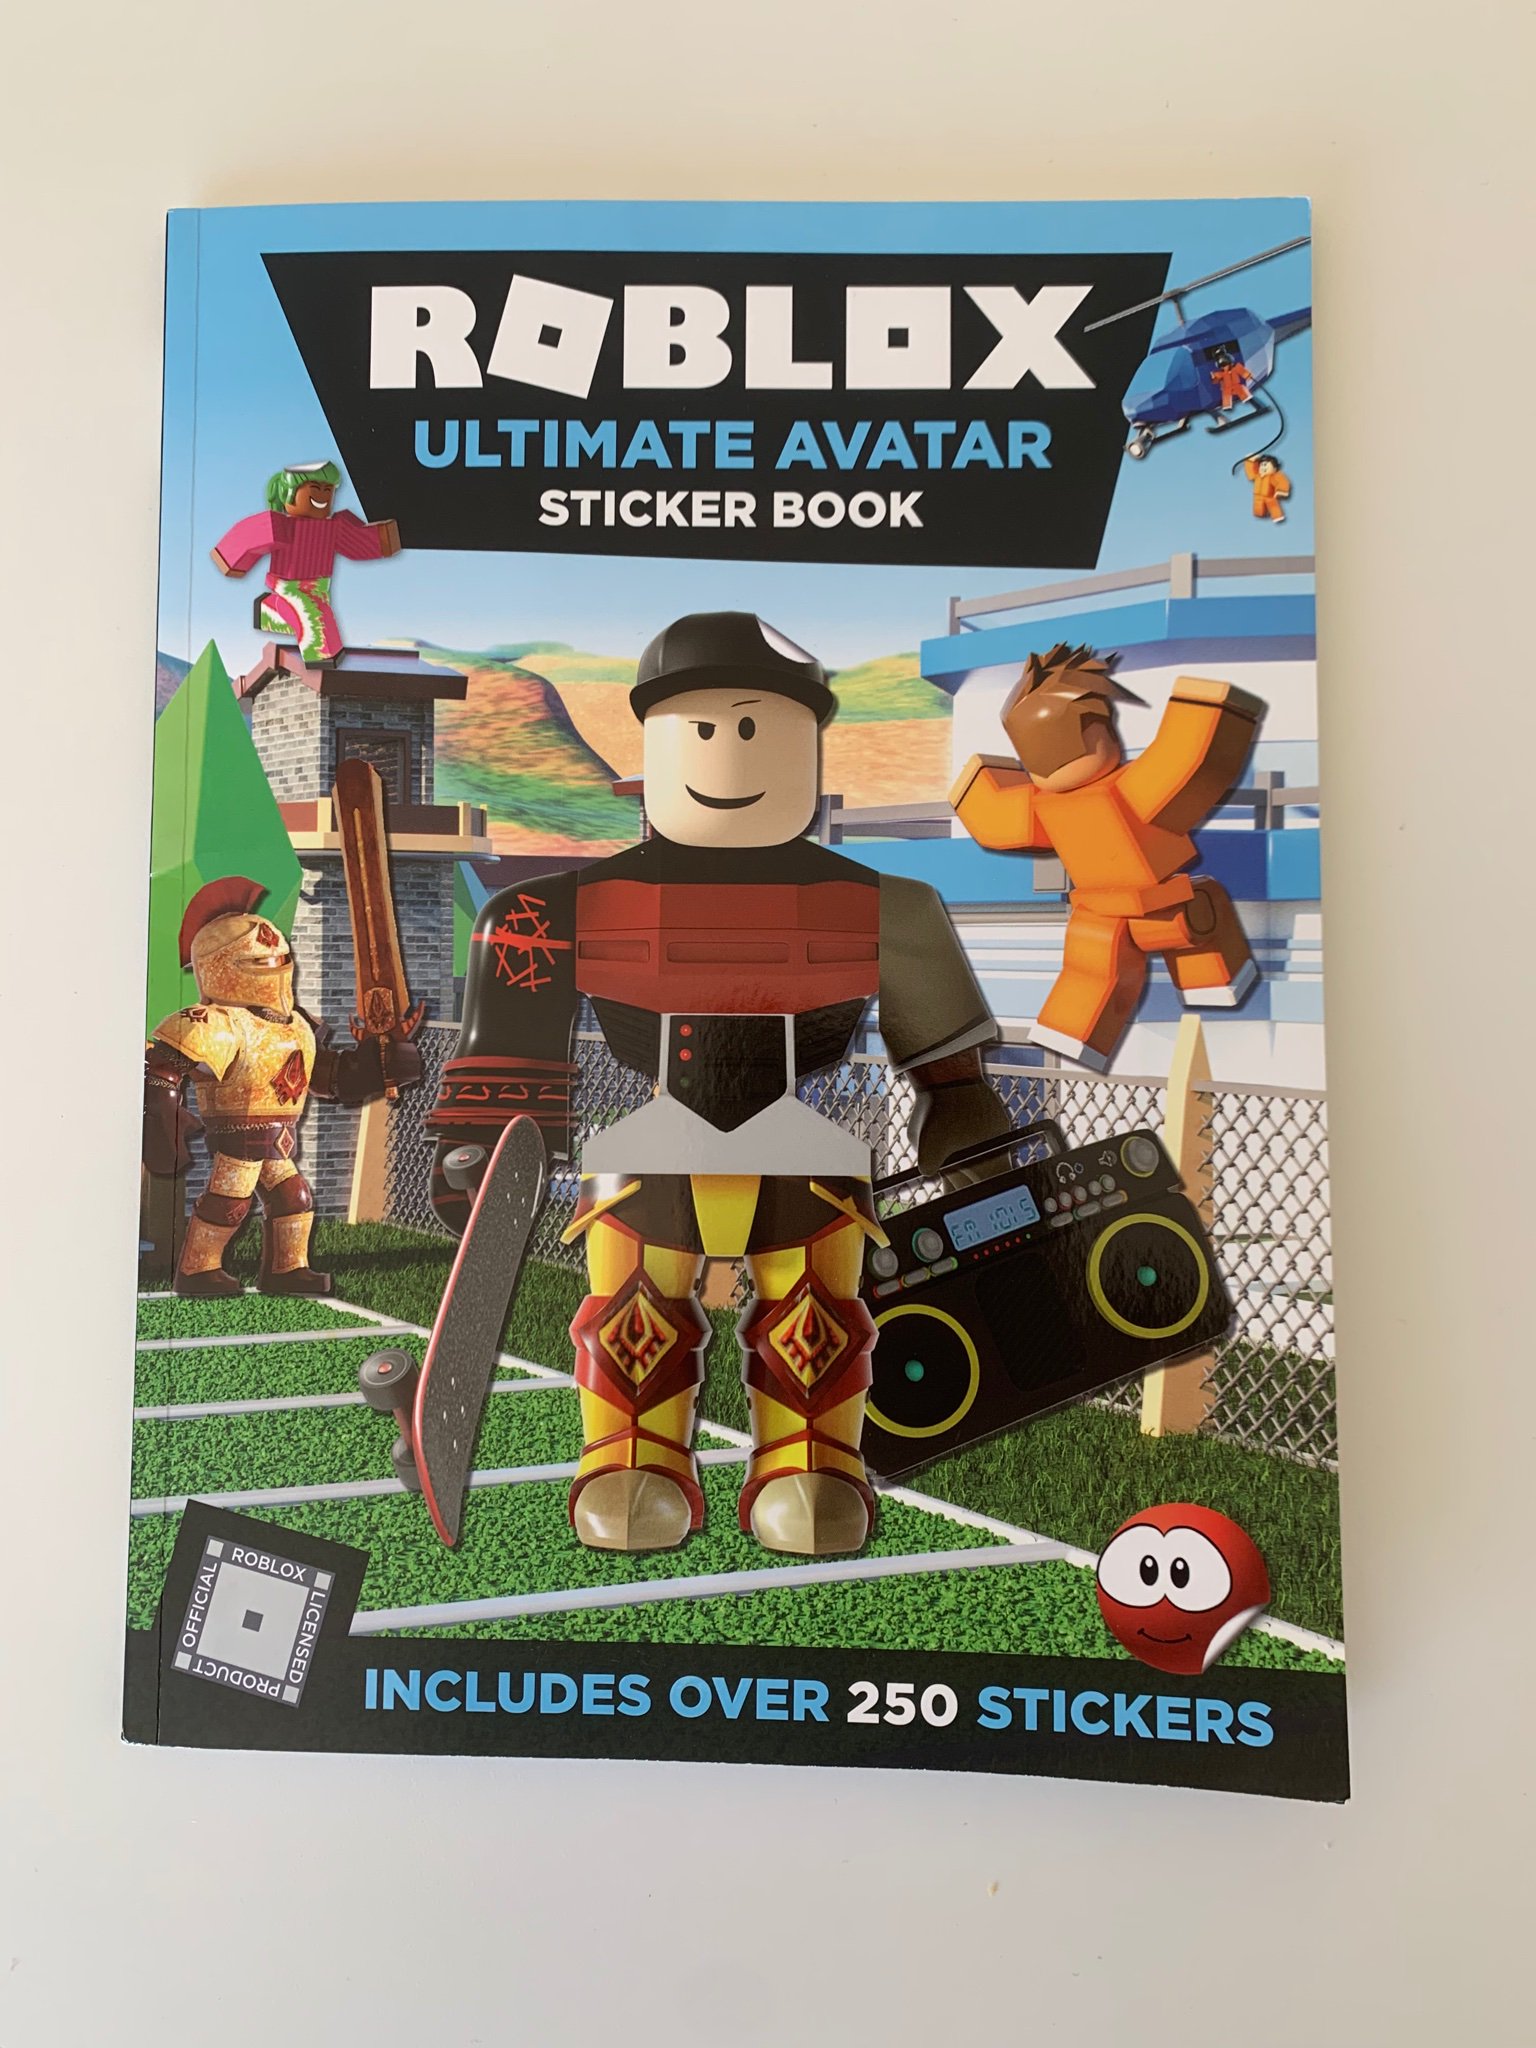 Asimo3089 On Twitter Wow Roblox Sent This In The Mail Yesterday It S A Sticker Book Featuring Jailbreak And Jailbreak Stickers I Even Got A Sticker Too Https T Co Jteji23khh - asimo3089 on twitter wow at roblox sent this in the mail